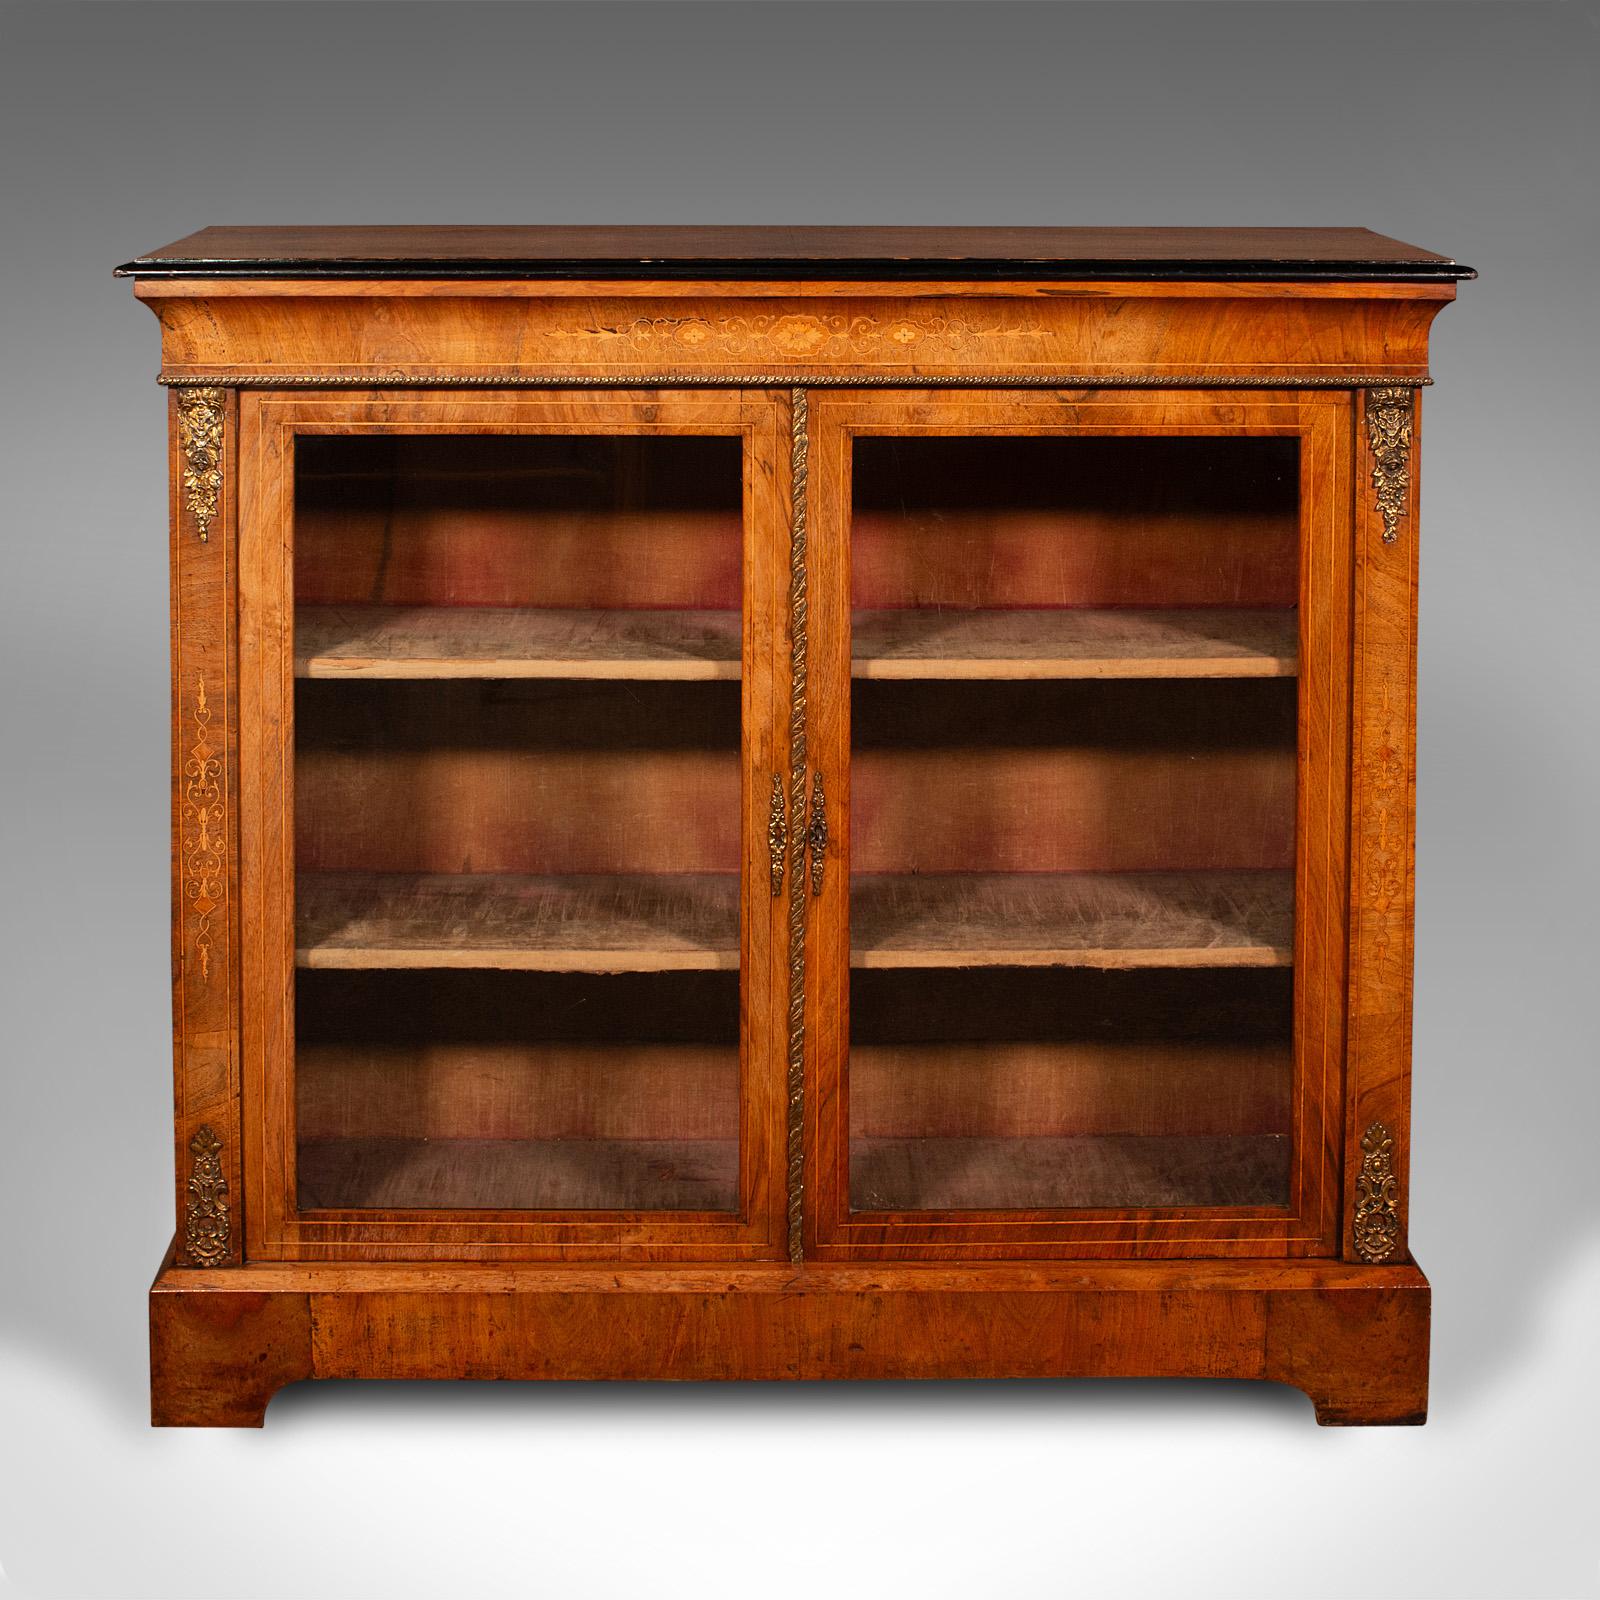 This is an antique twin pier cabinet. An English, walnut glazed bookcase, dating to the Victorian period, circa 1870.

Of superb appearance and craftsmanship, with appealing detail
Displays a desirable aged patina and in good order
Select walnut